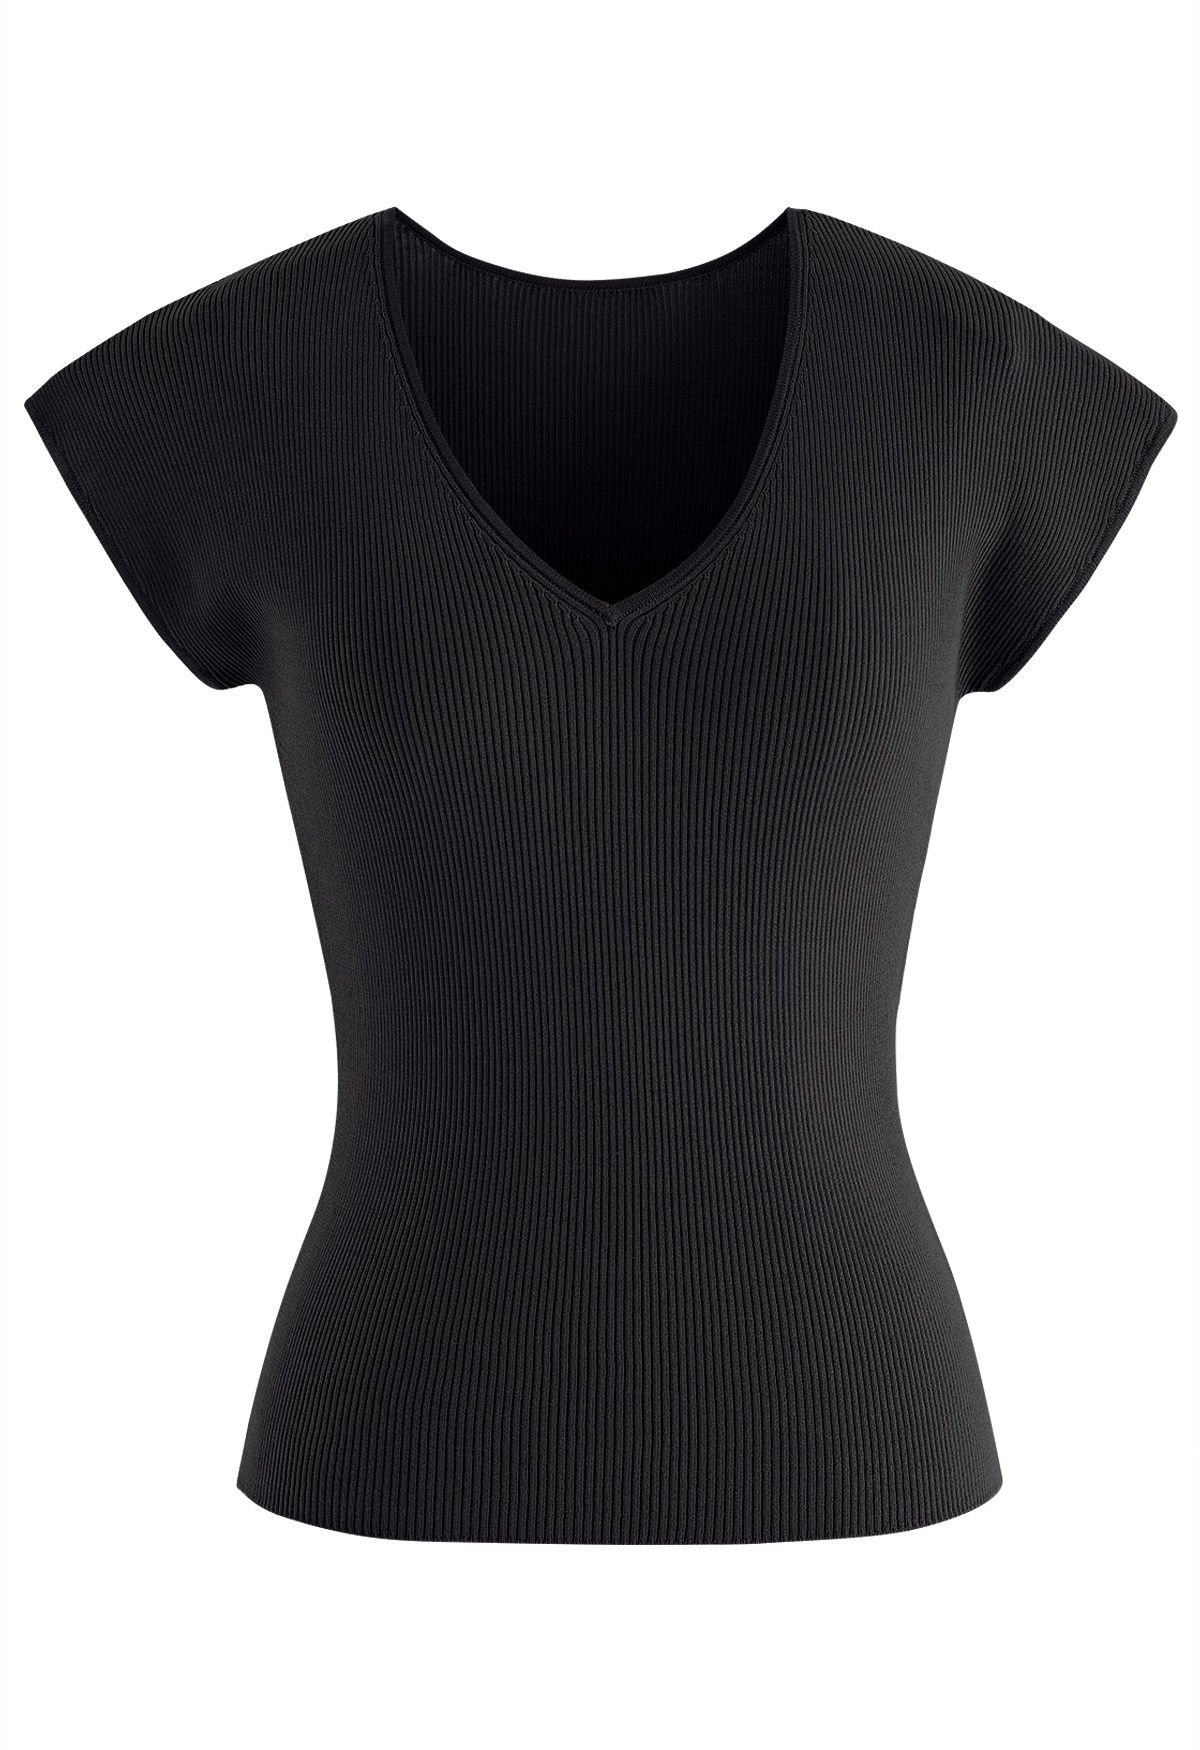 V-Neck Fitted Rib Knit Top in Black - Retro, Indie and Unique Fashion